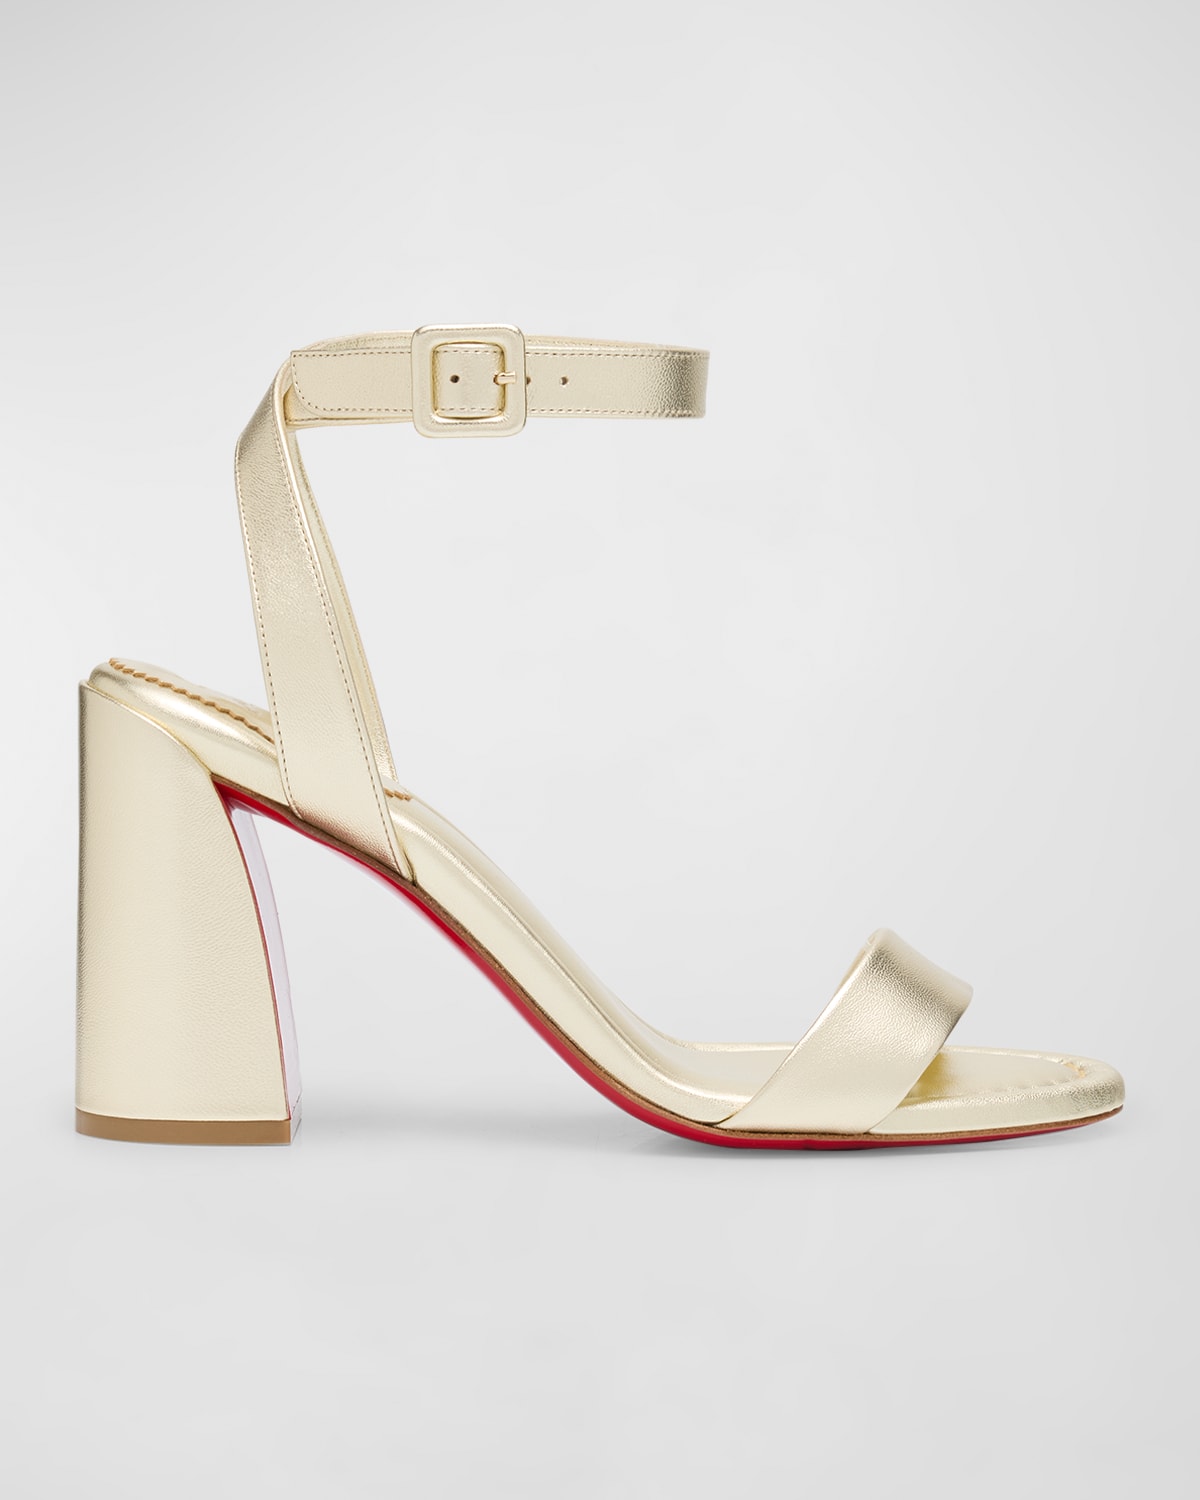 Christian Louboutin Miss Sabina Metallic Red Sole Sandals In Gold